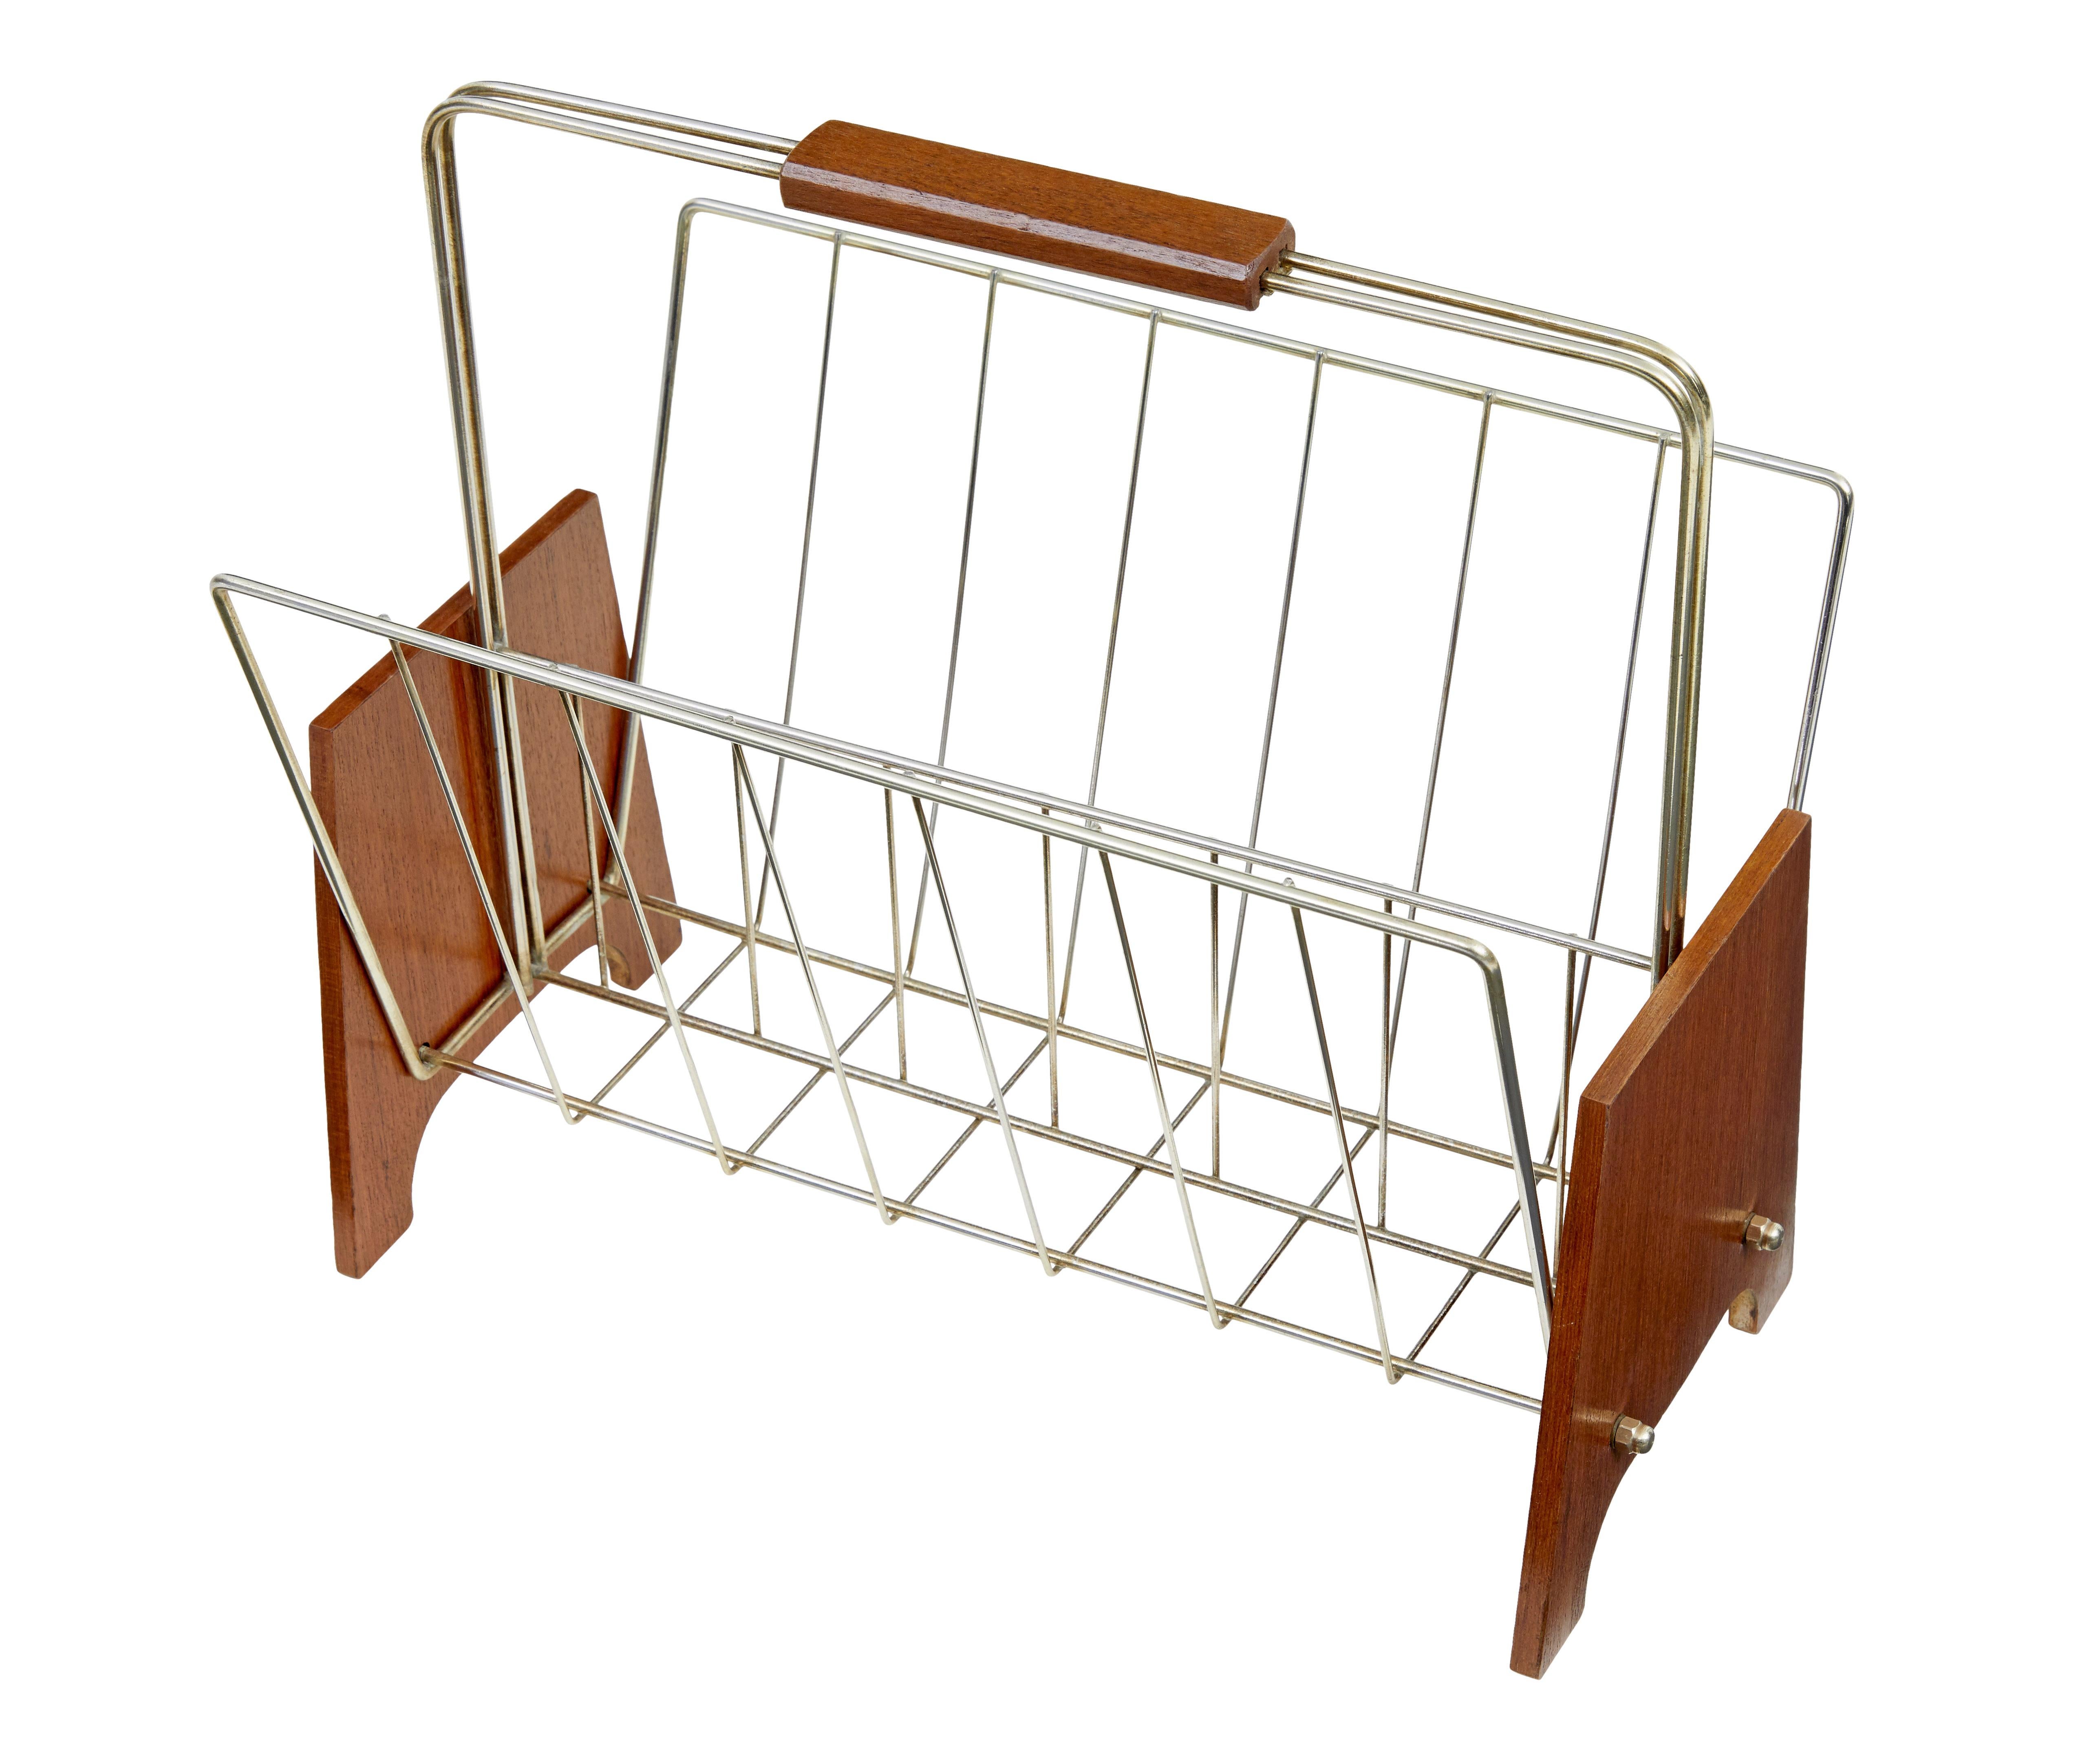 Mid 20th century Scandinavian modern teak and brass magazine rack circa 1960.

Good quality piece of Scandinavian design.  2 teak shaped ends with brass wired framed network for storage of magazines and newspapers.  Completed by a wooden handle on